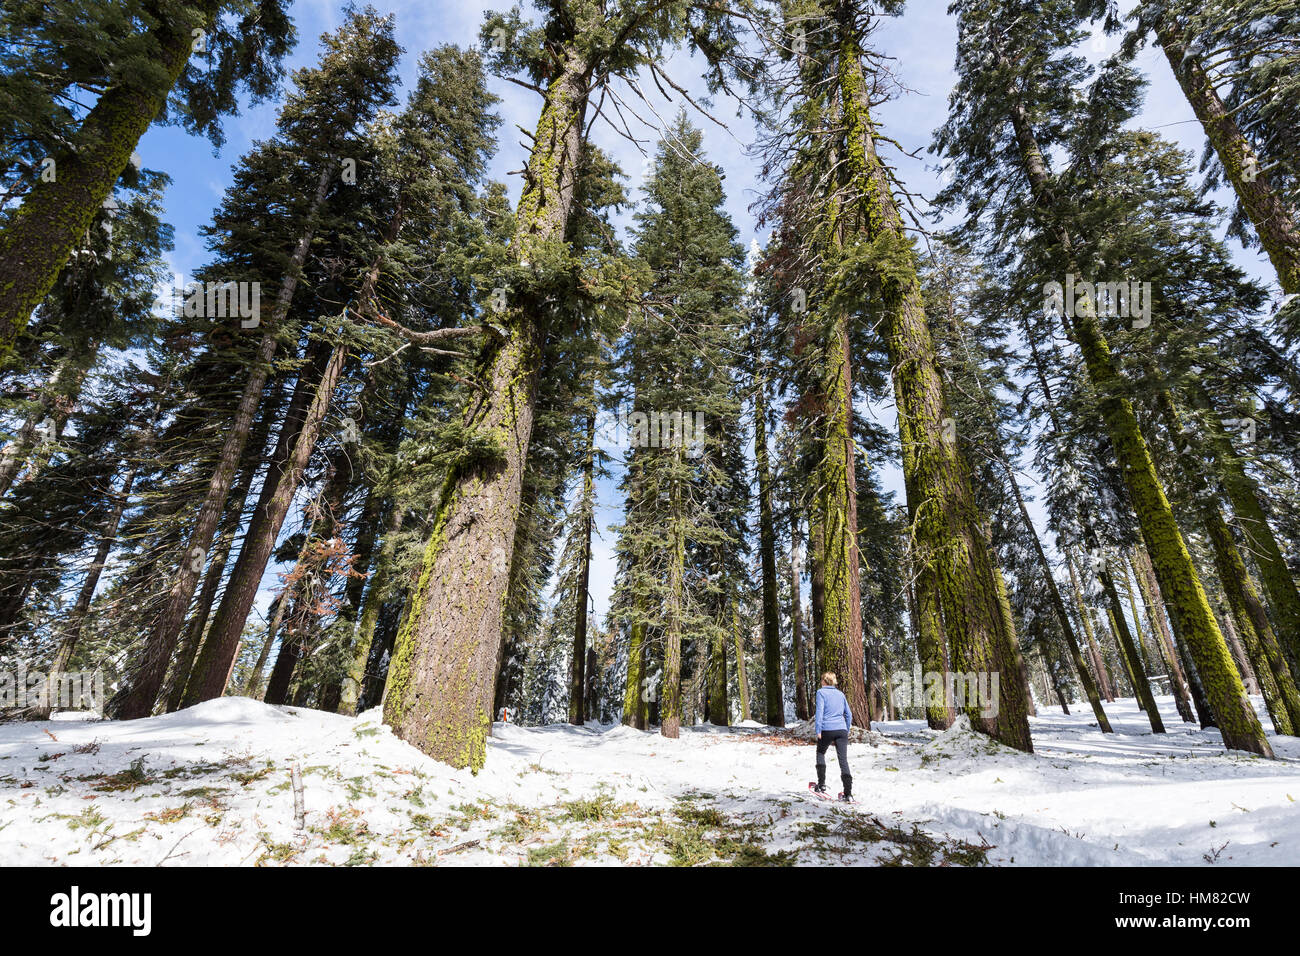 A woman snowshoes amongst huge trees and redwoods in the winter snow at Kings Canyon National Park. Stock Photo